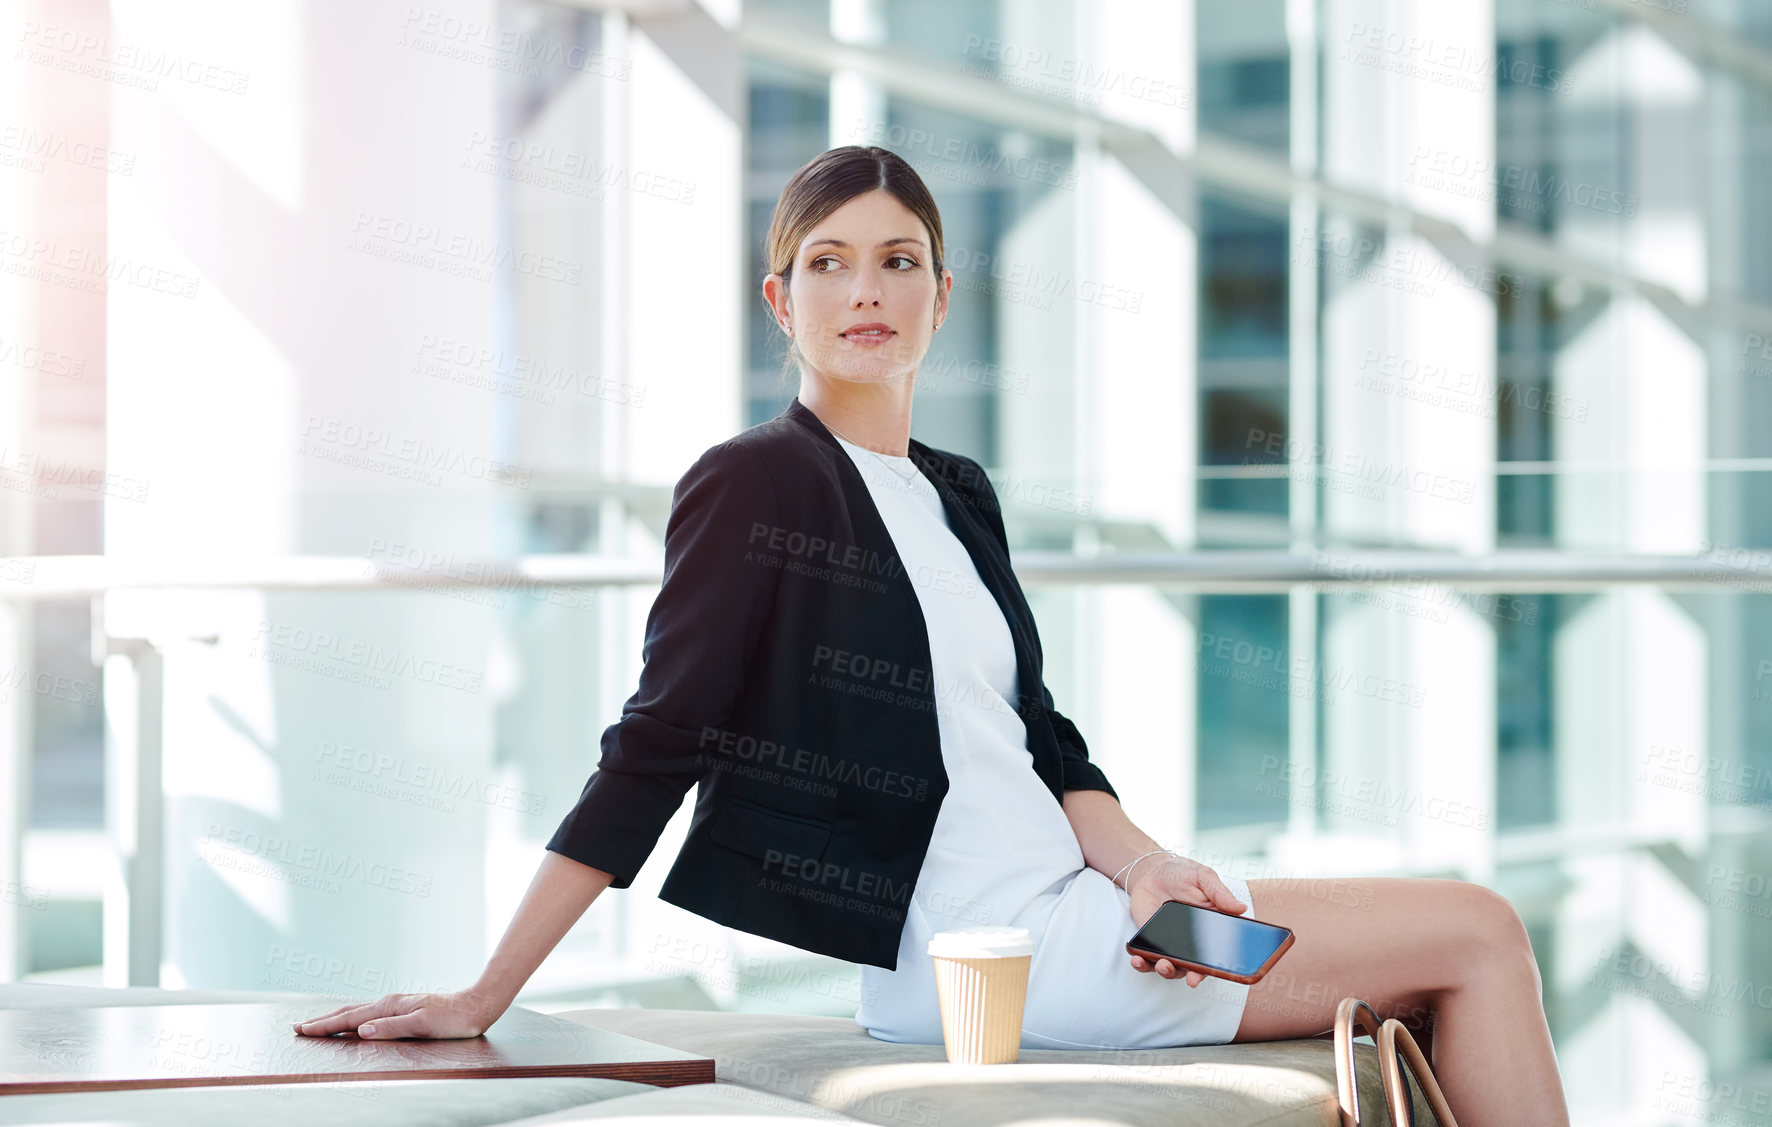 Buy stock photo Cropped shot of an attractive young businesswoman looking thoughtful while using a smartphone in a modern office